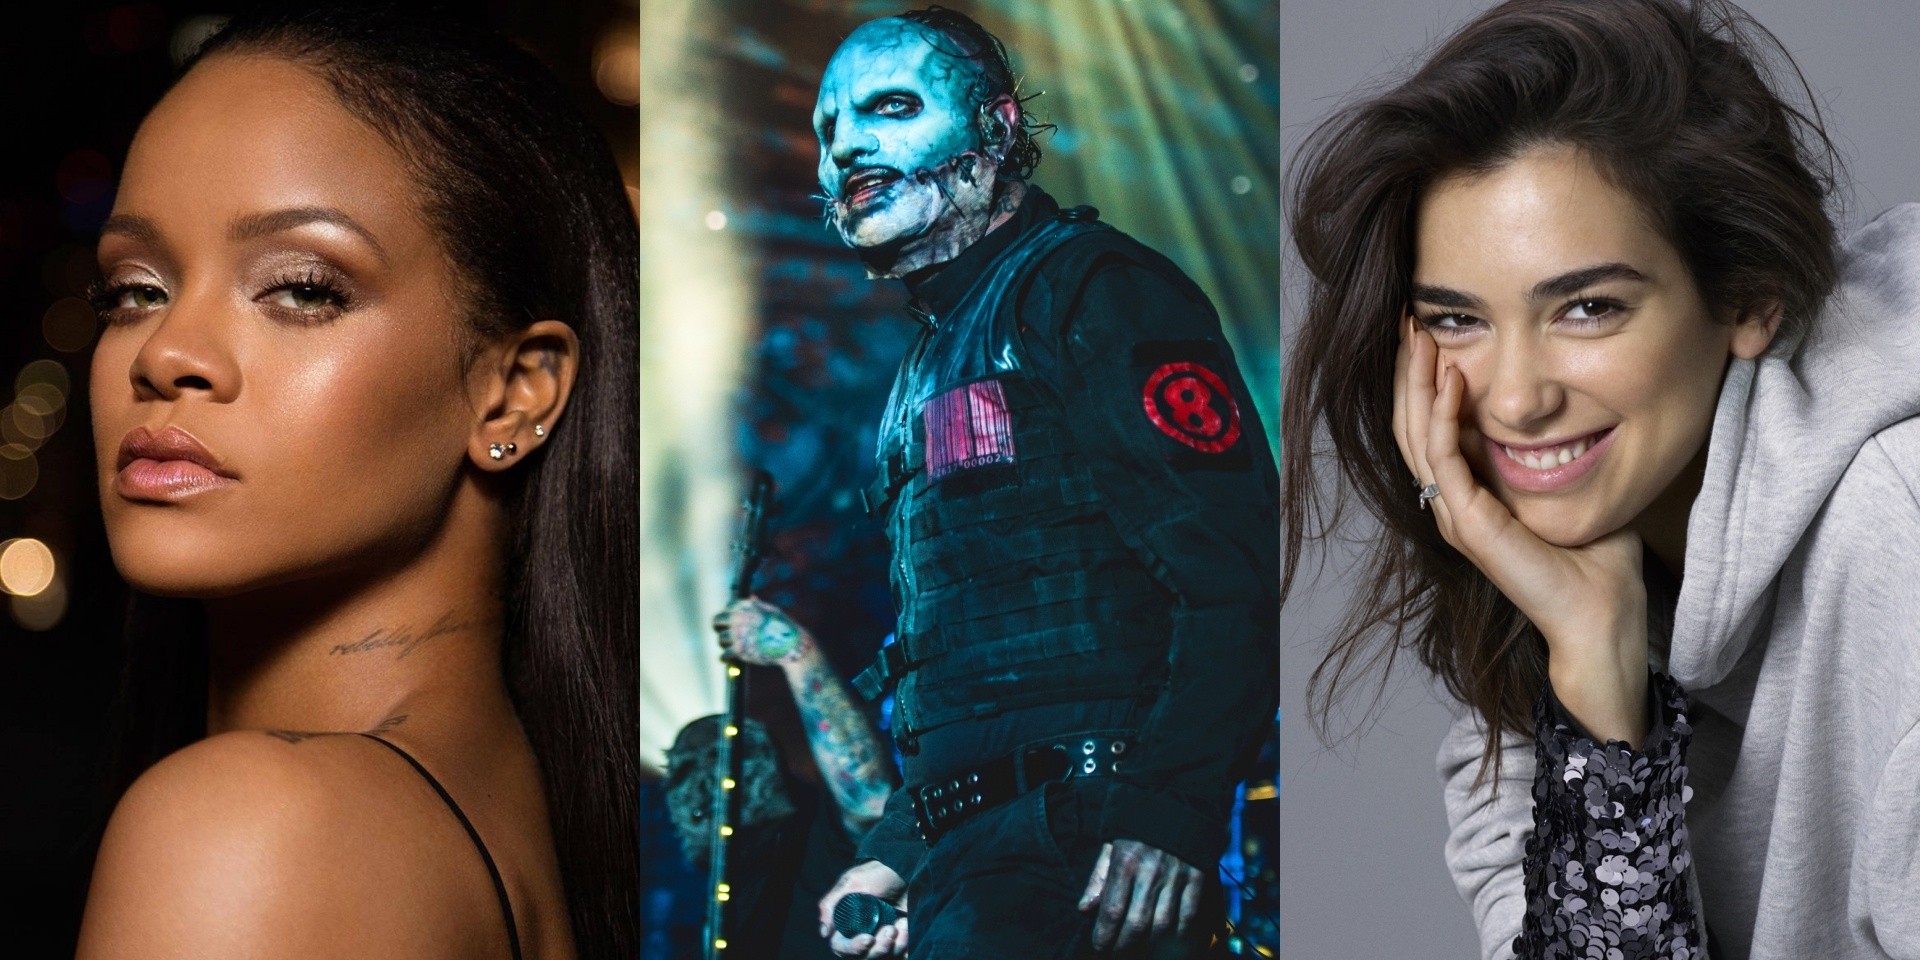 30 artists whose albums we're looking forward to in 2019